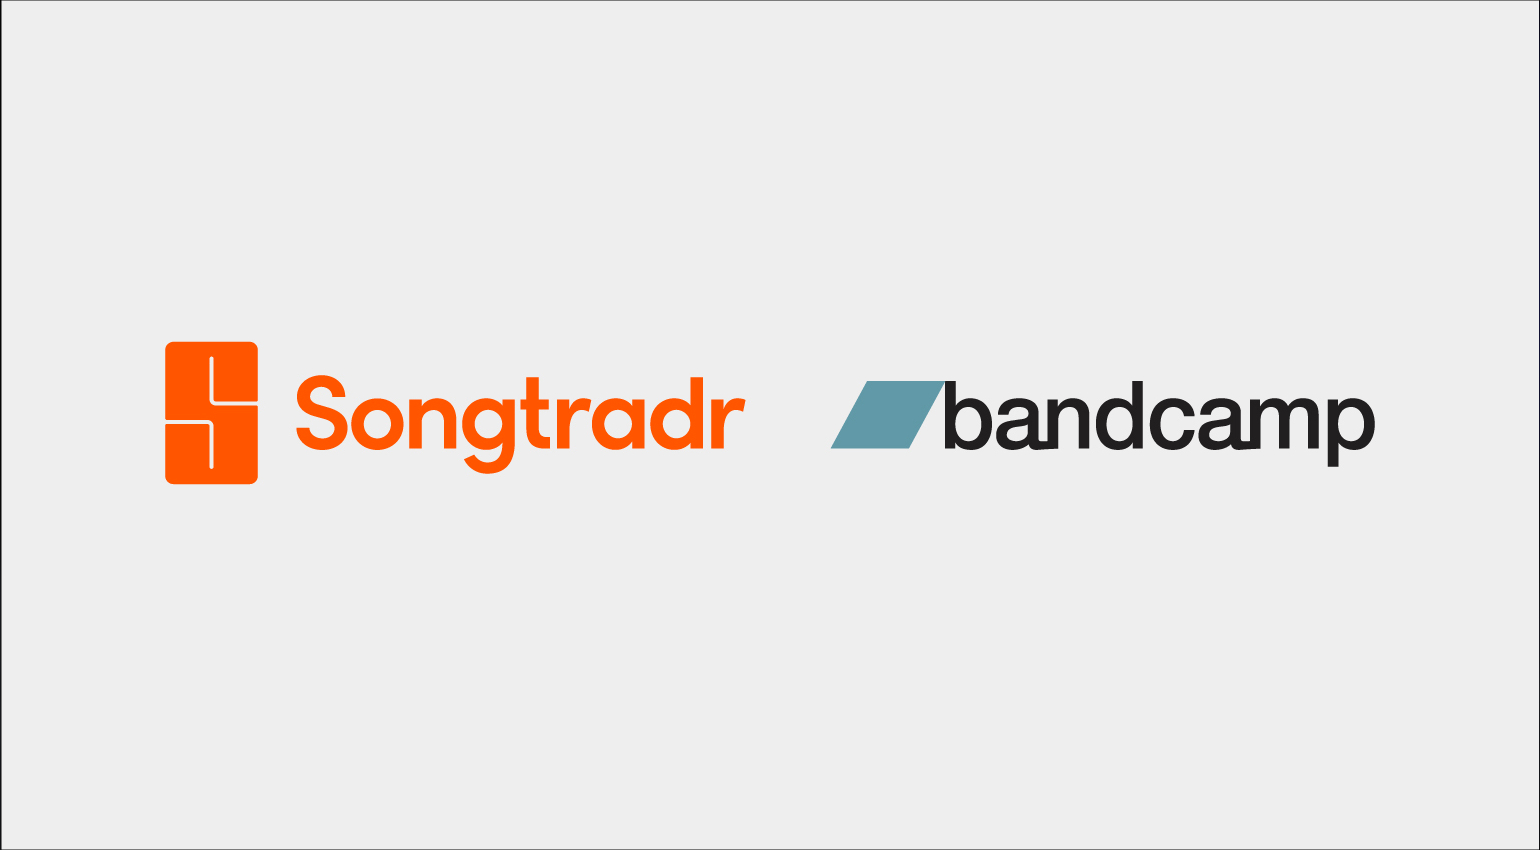 Bandcamp sold to Songtradr - What does it mean for musicians?